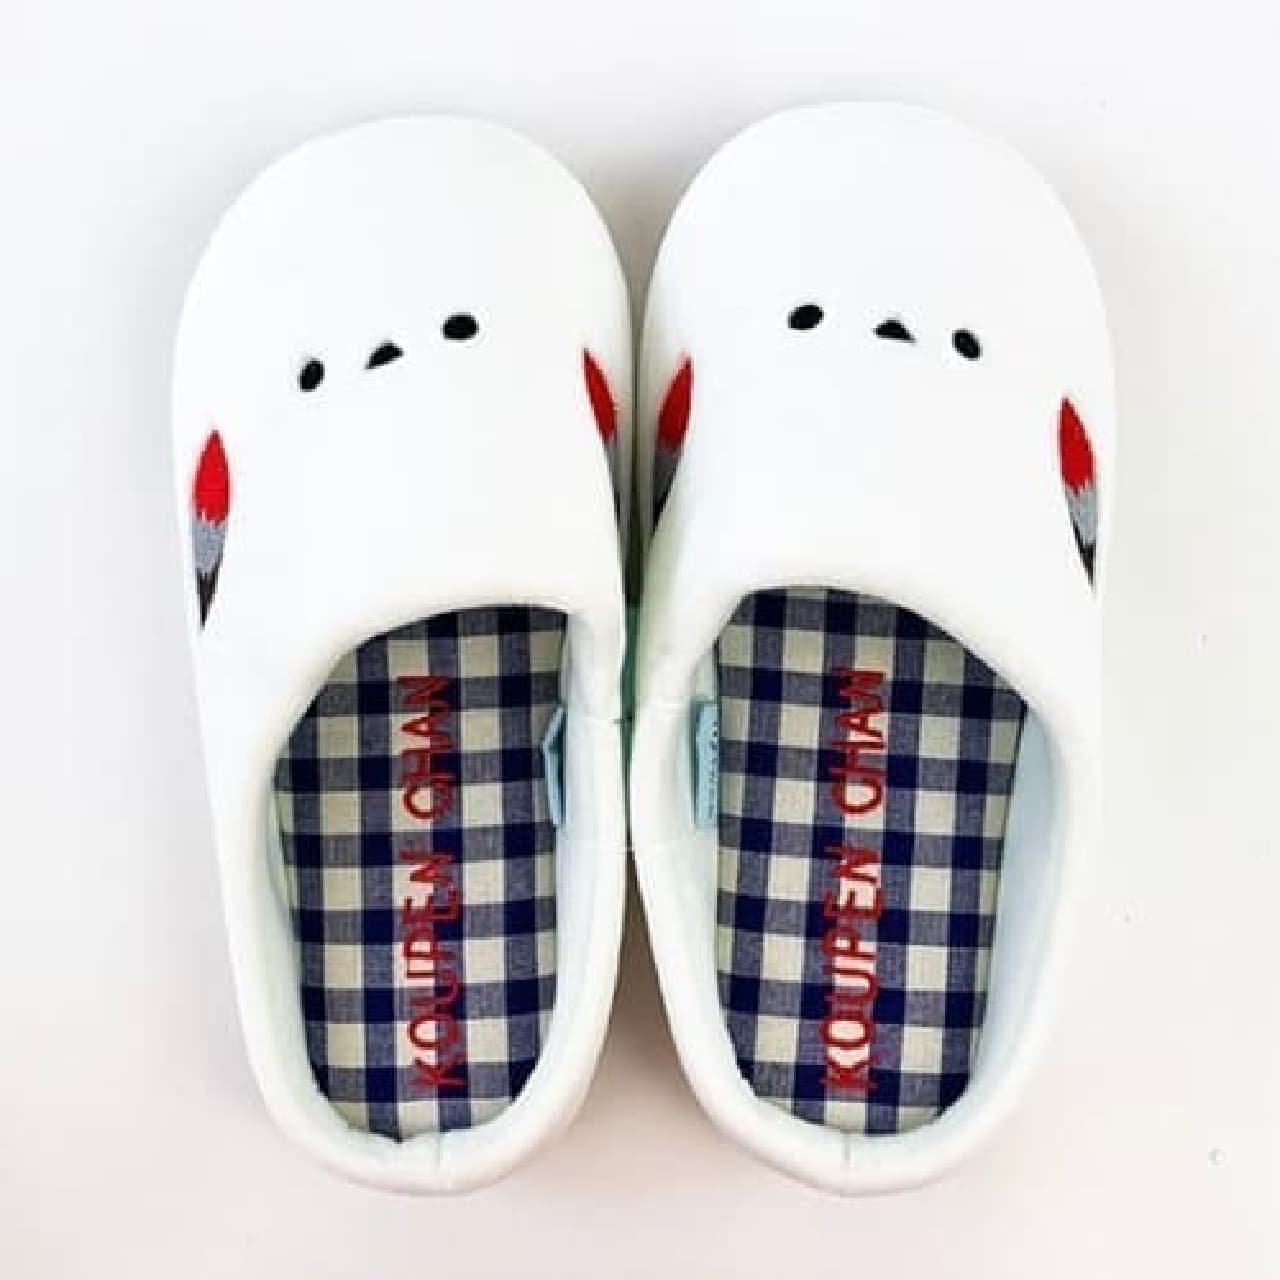 Cute Koupen-chan's toilet cover is here! Evil Enaga's slippers